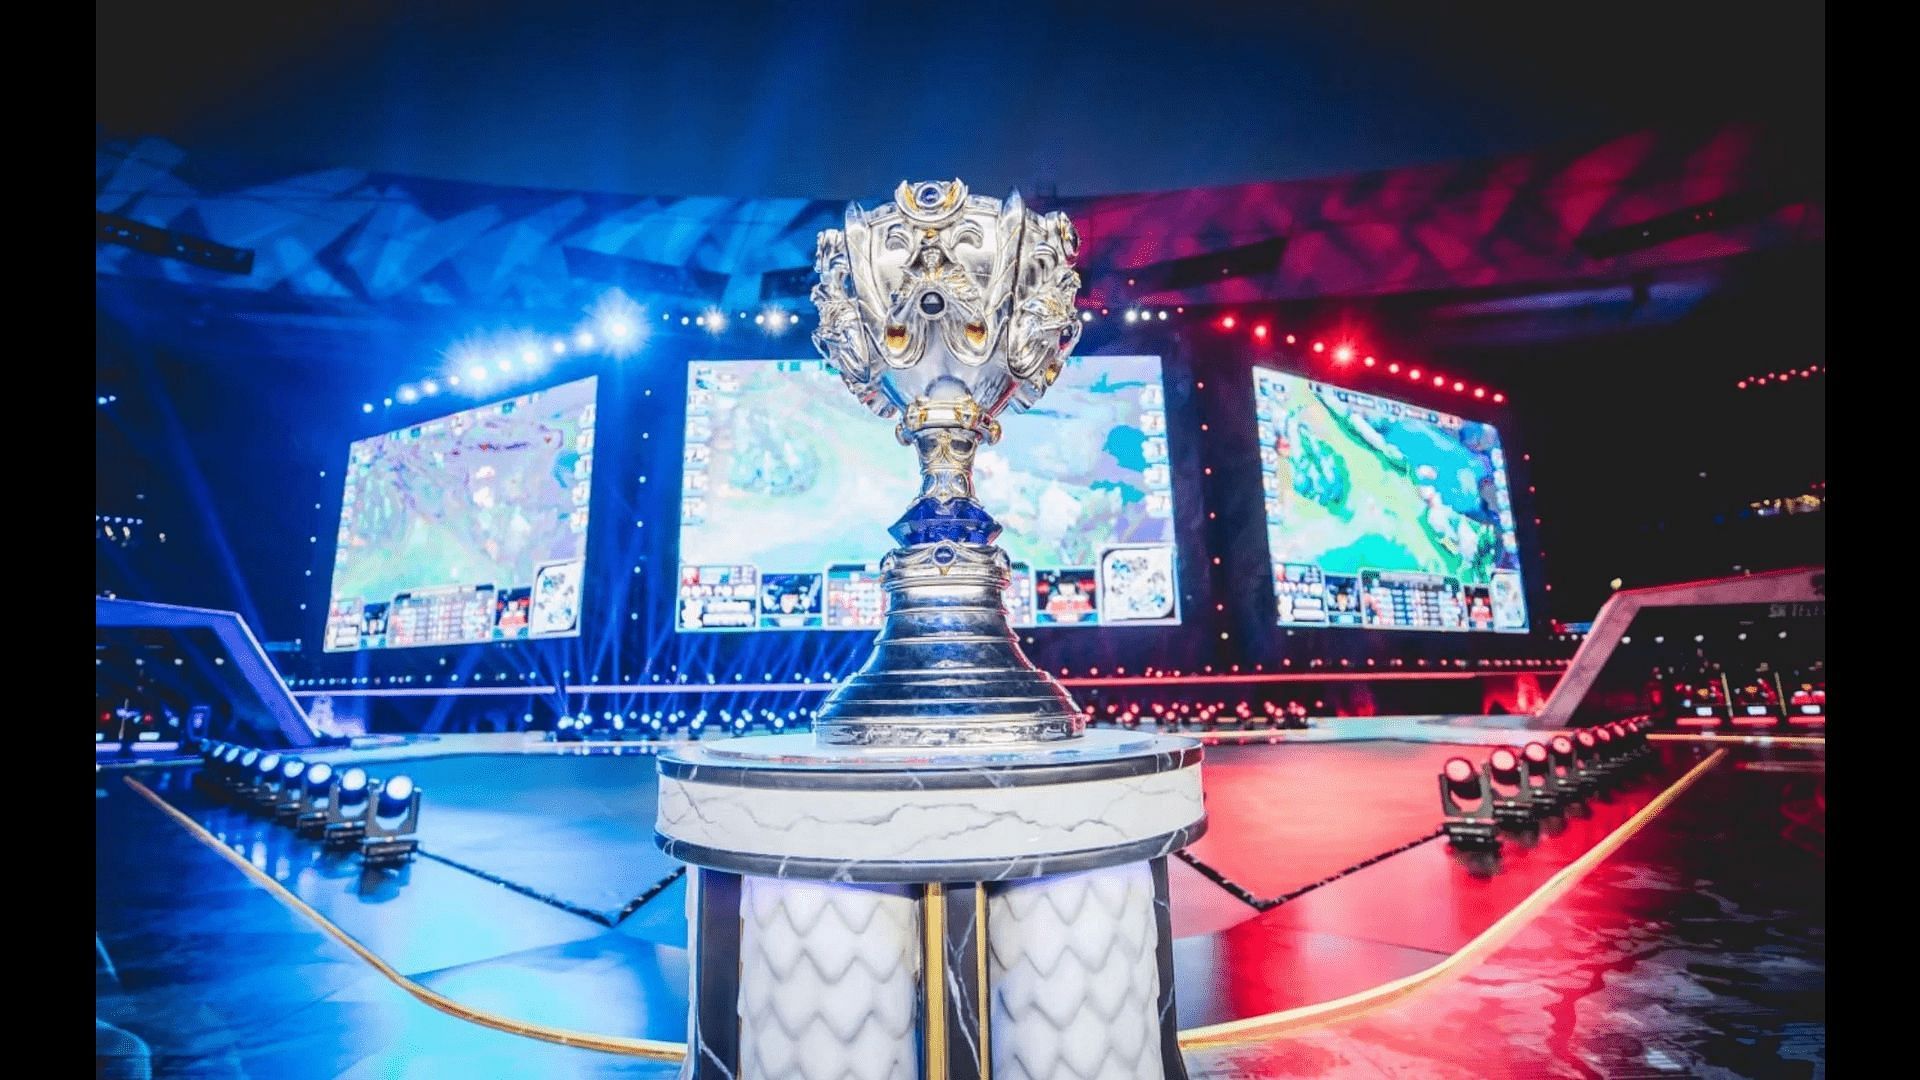 Champions pros use at Worlds 2022 may not be the strongest